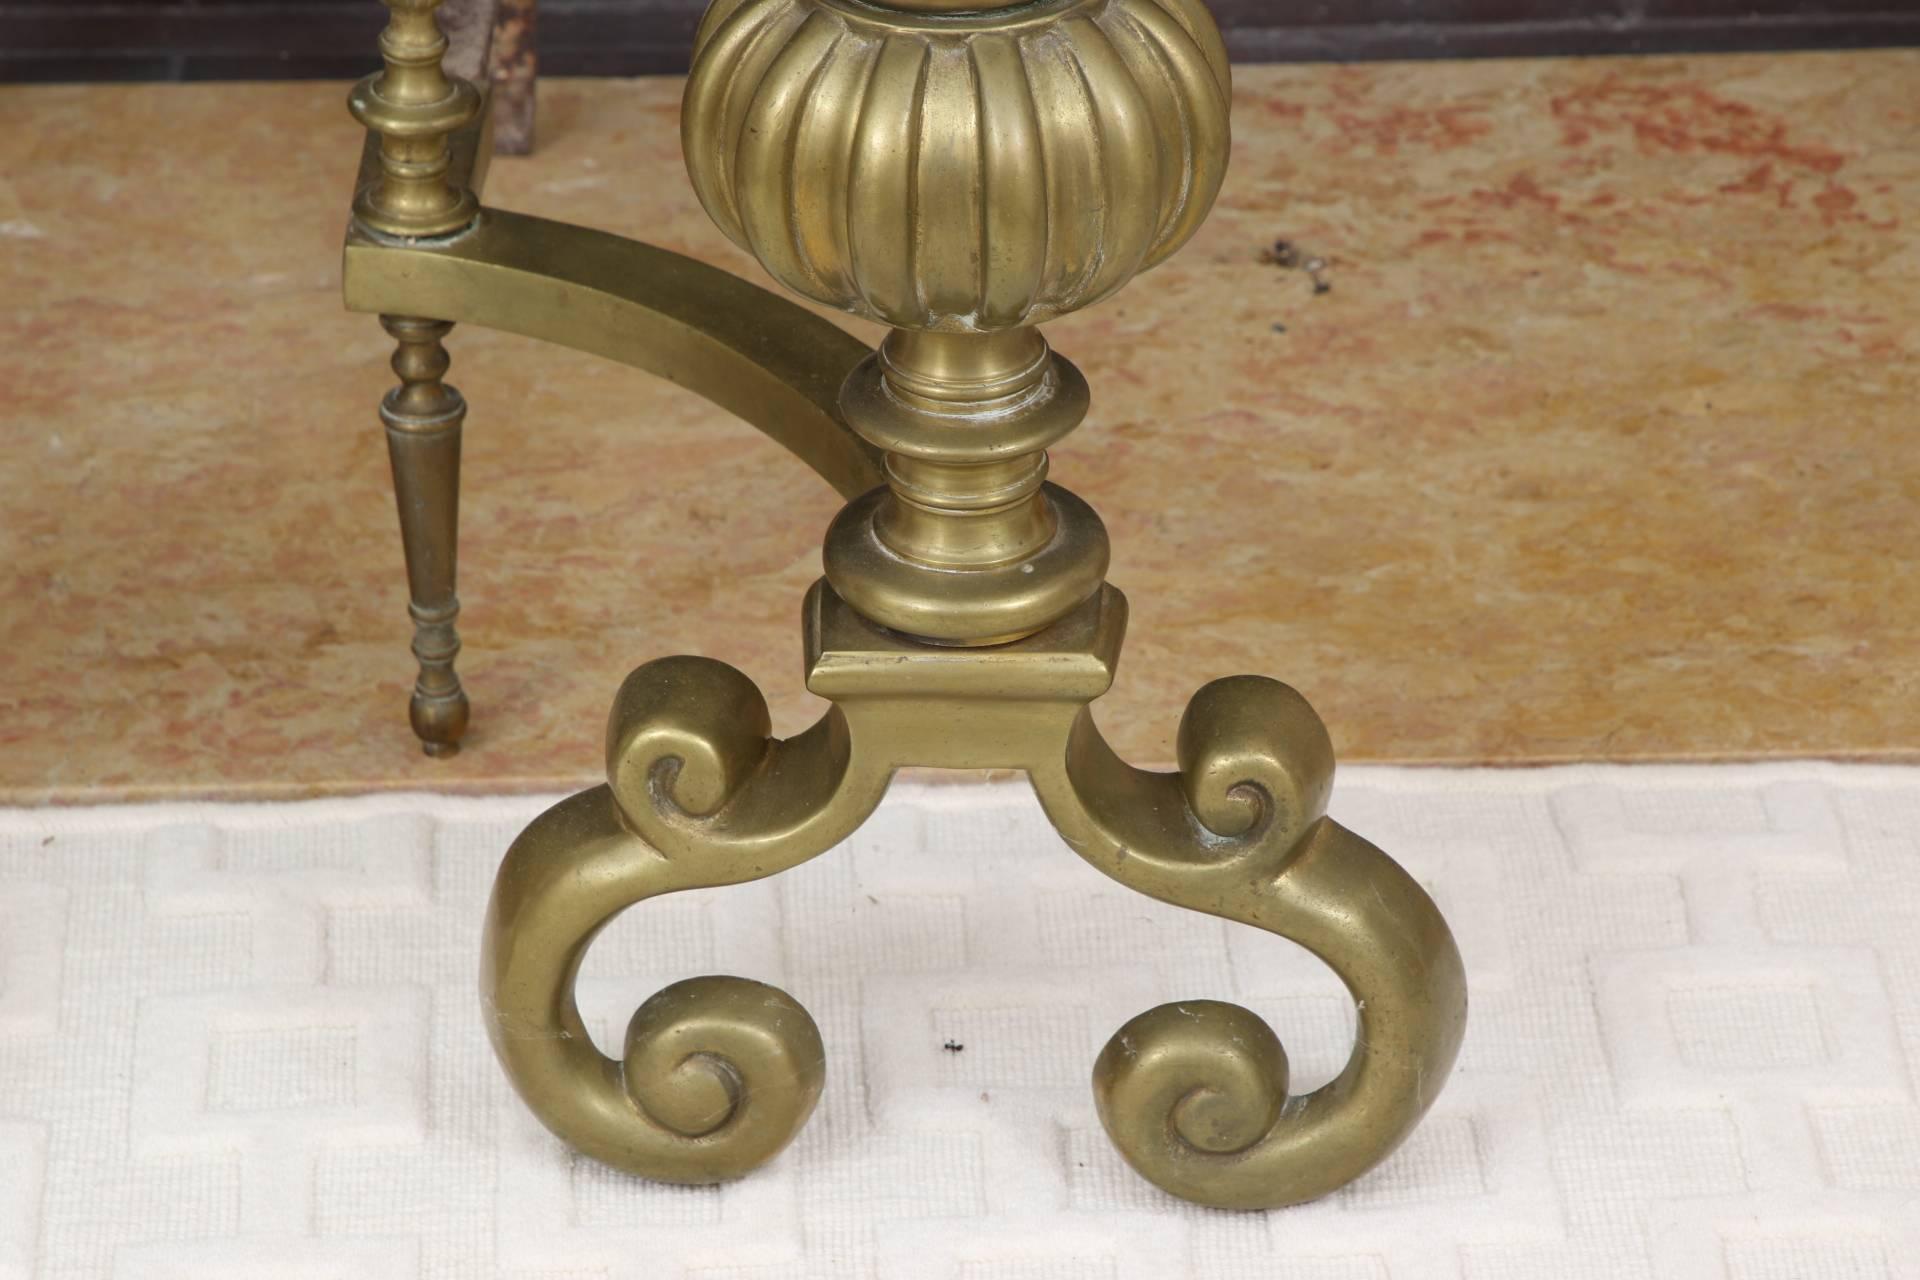 Triple lobed forms with ball finials, raised on scrolled legs. Curved footed arms at the back with finials and attached to long iron rods. Good patina.